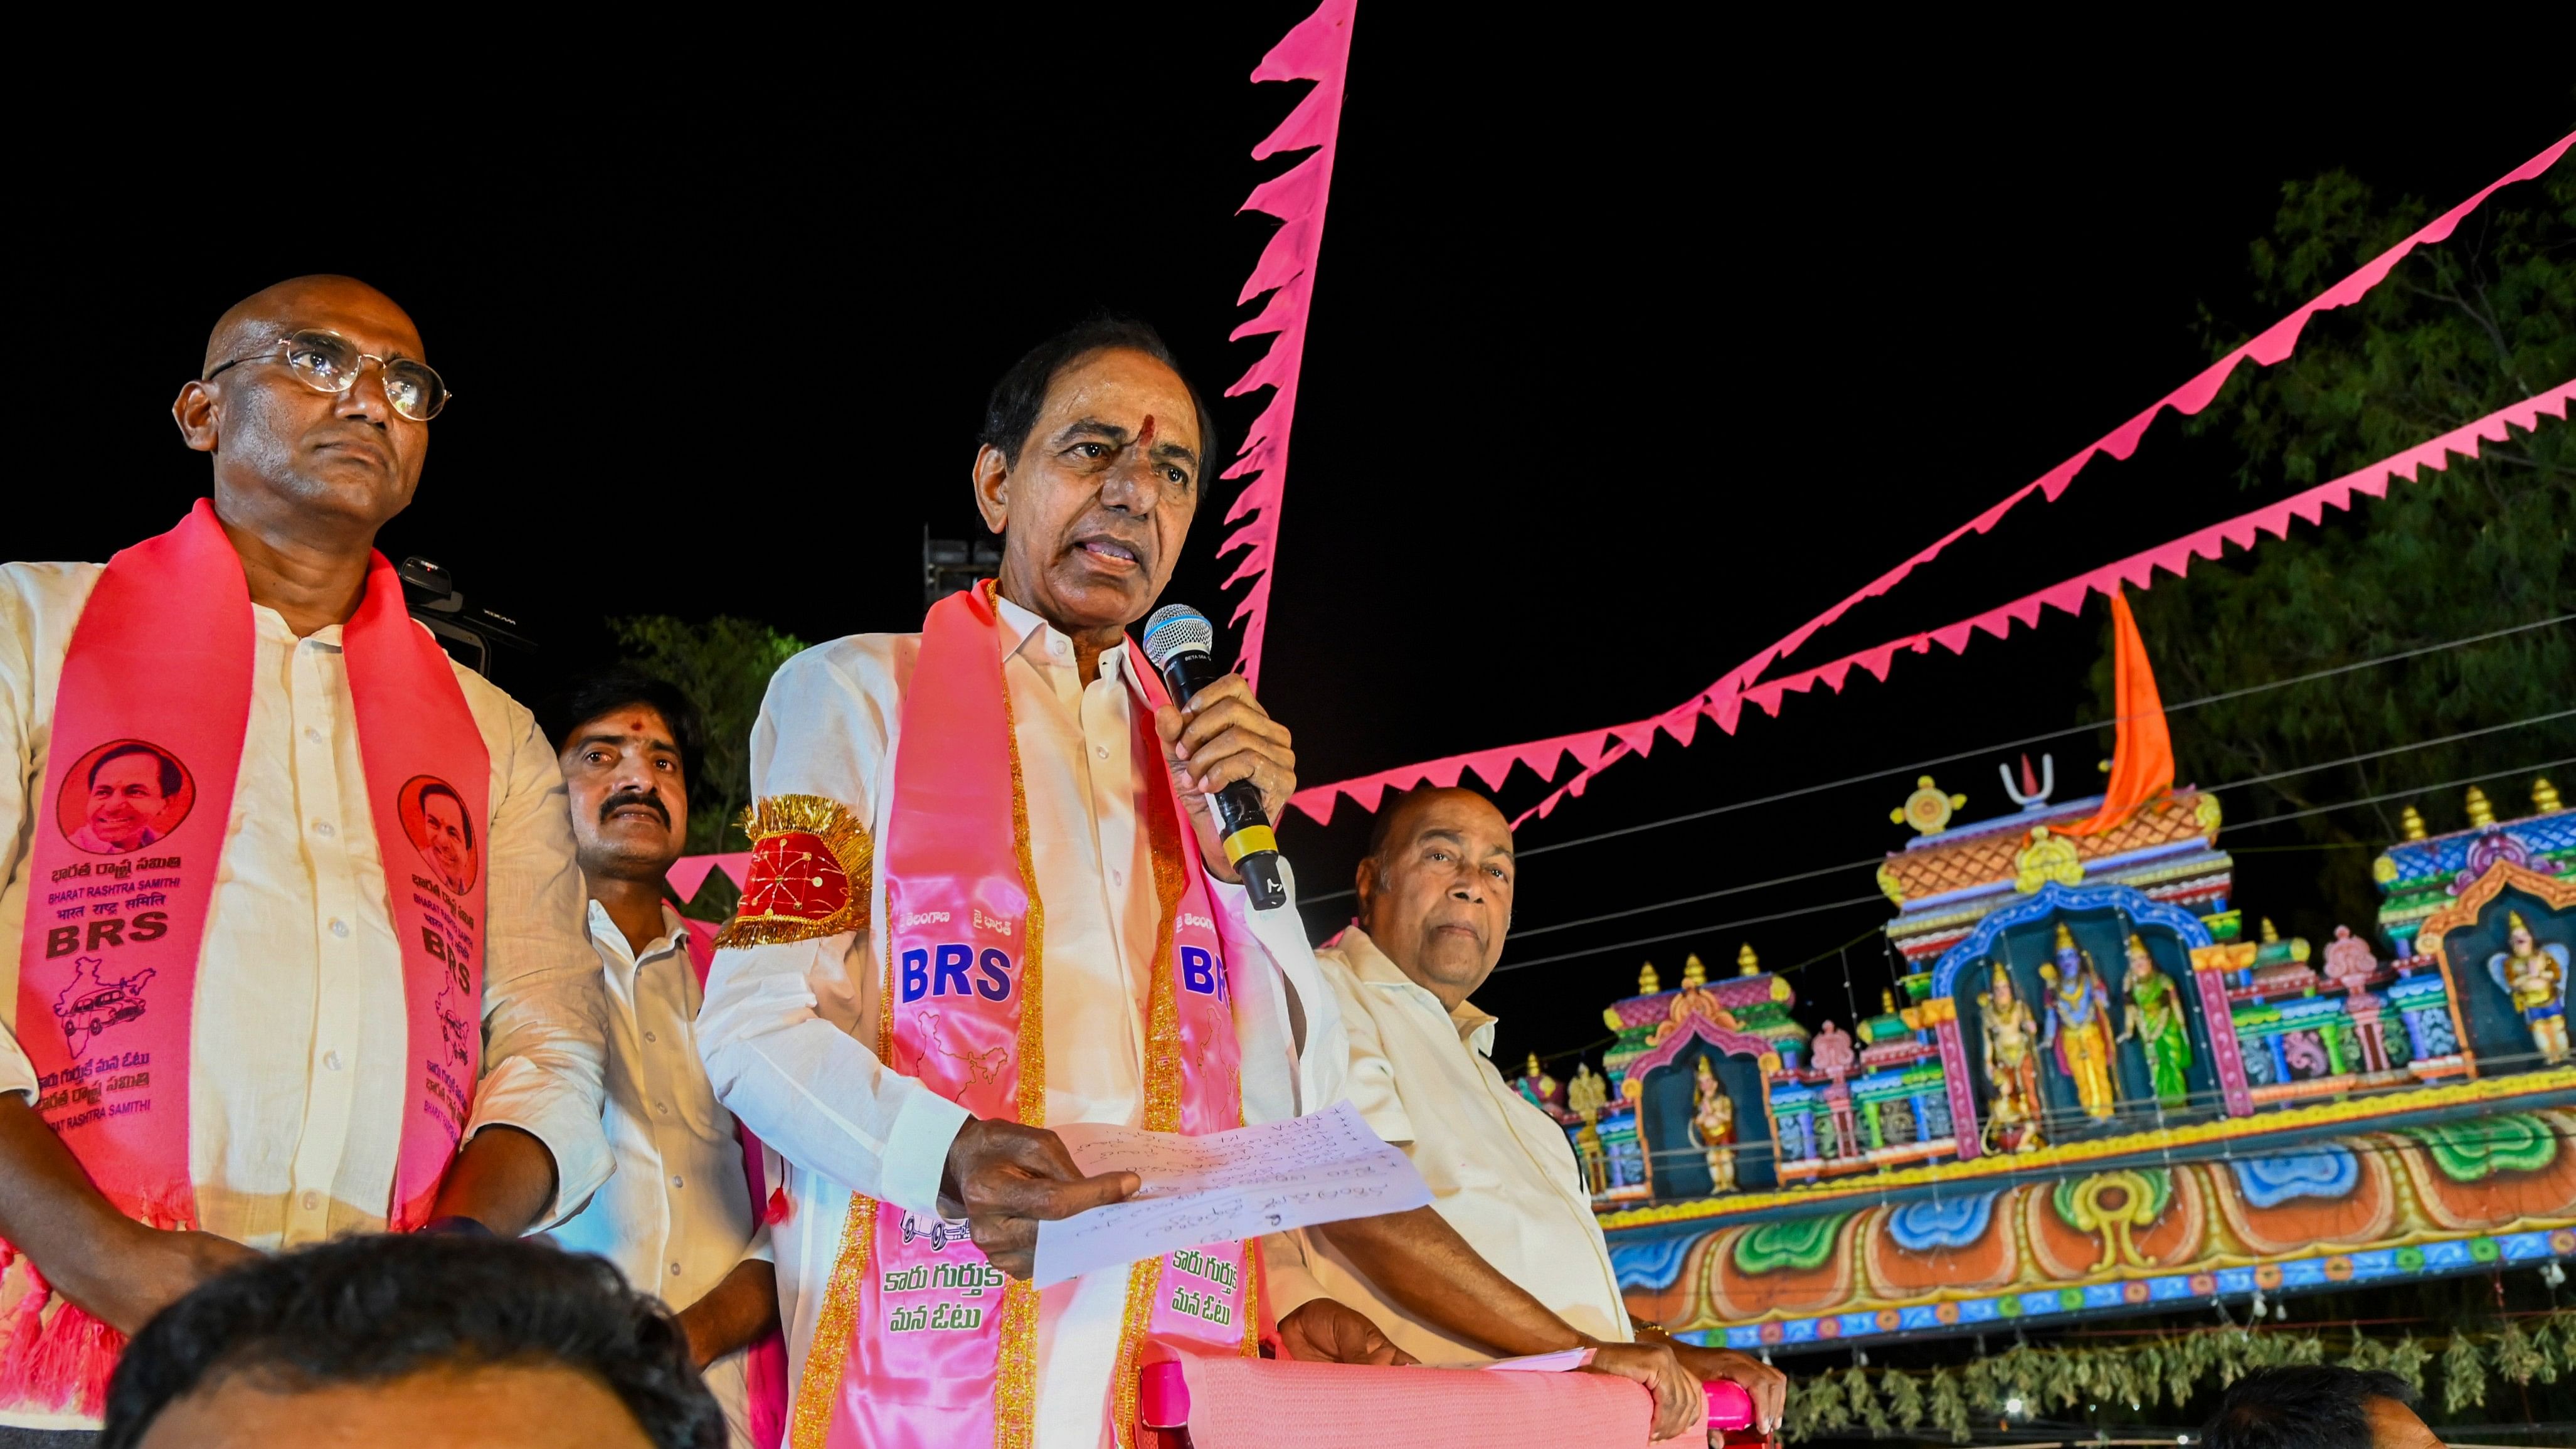 <div class="paragraphs"><p>BRS Party President K Chandrashekar Rao with others during an election roadshow for the Lok Sabha elections.</p></div>